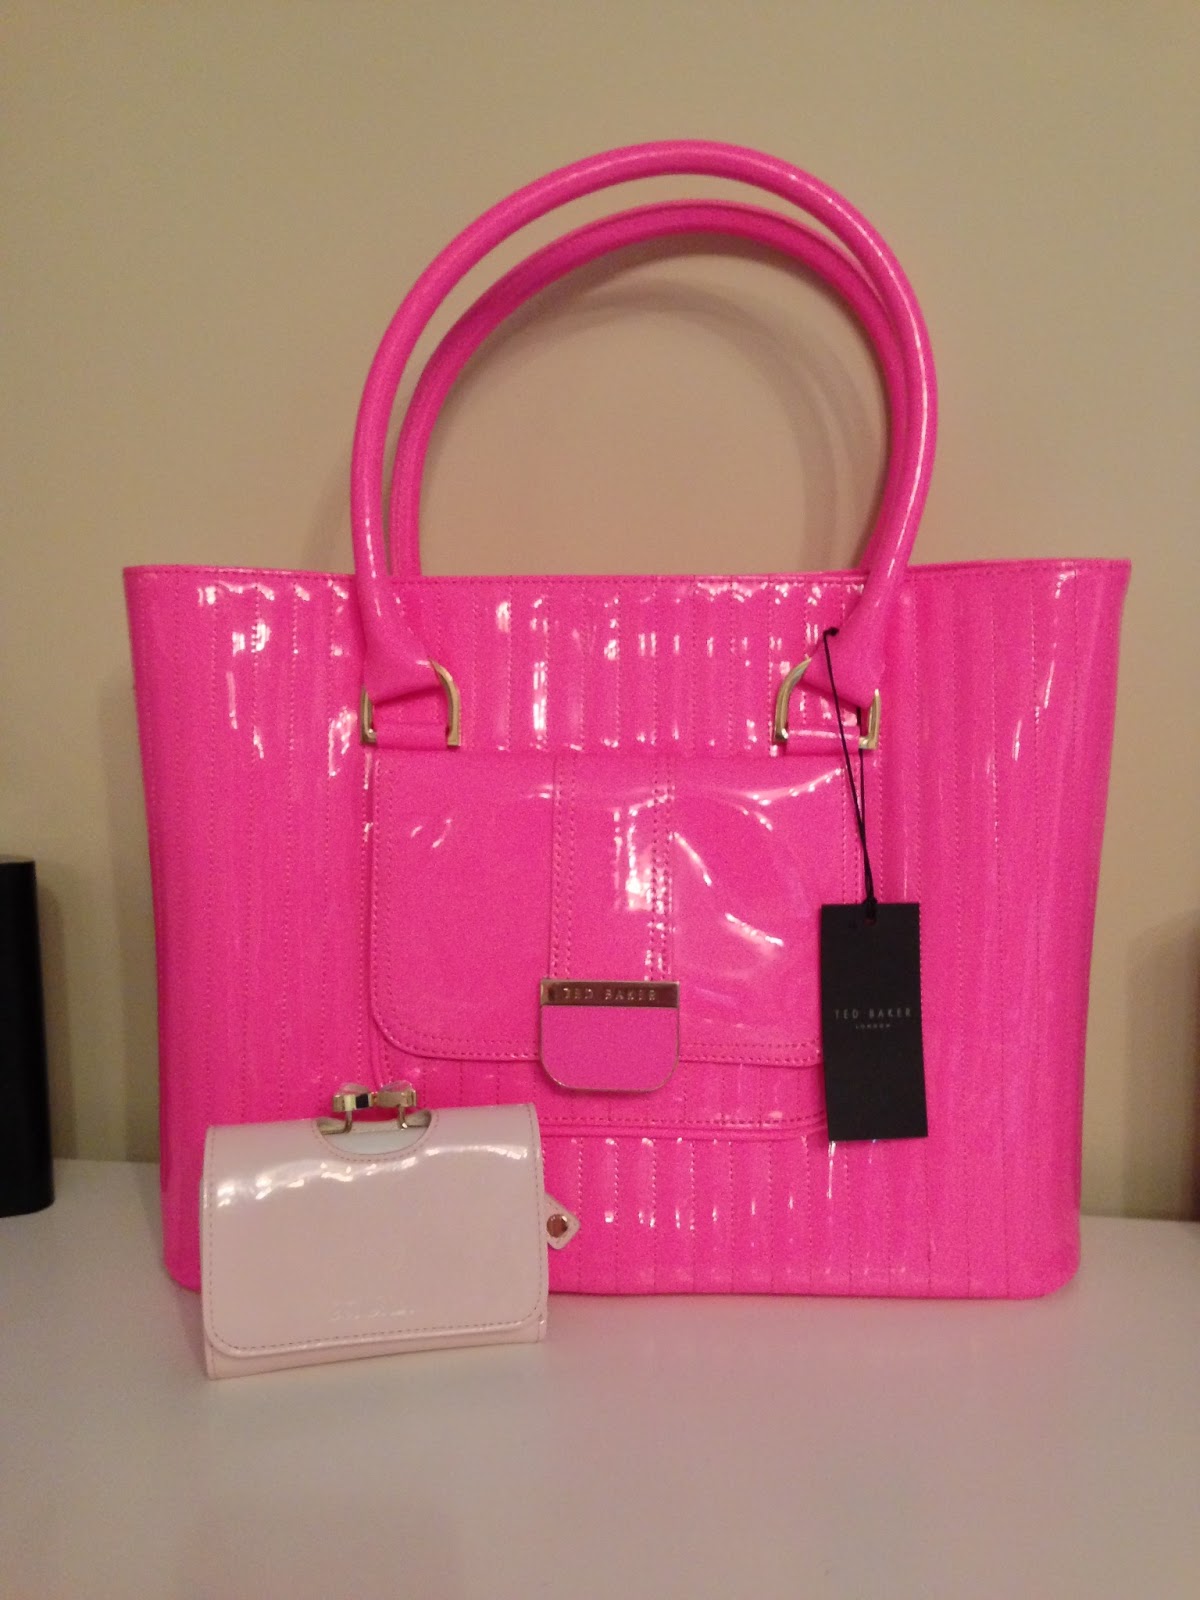 Ted Baker Marr Bag & Tyro Purse ~ Confessions Of A Beauty Addict.....